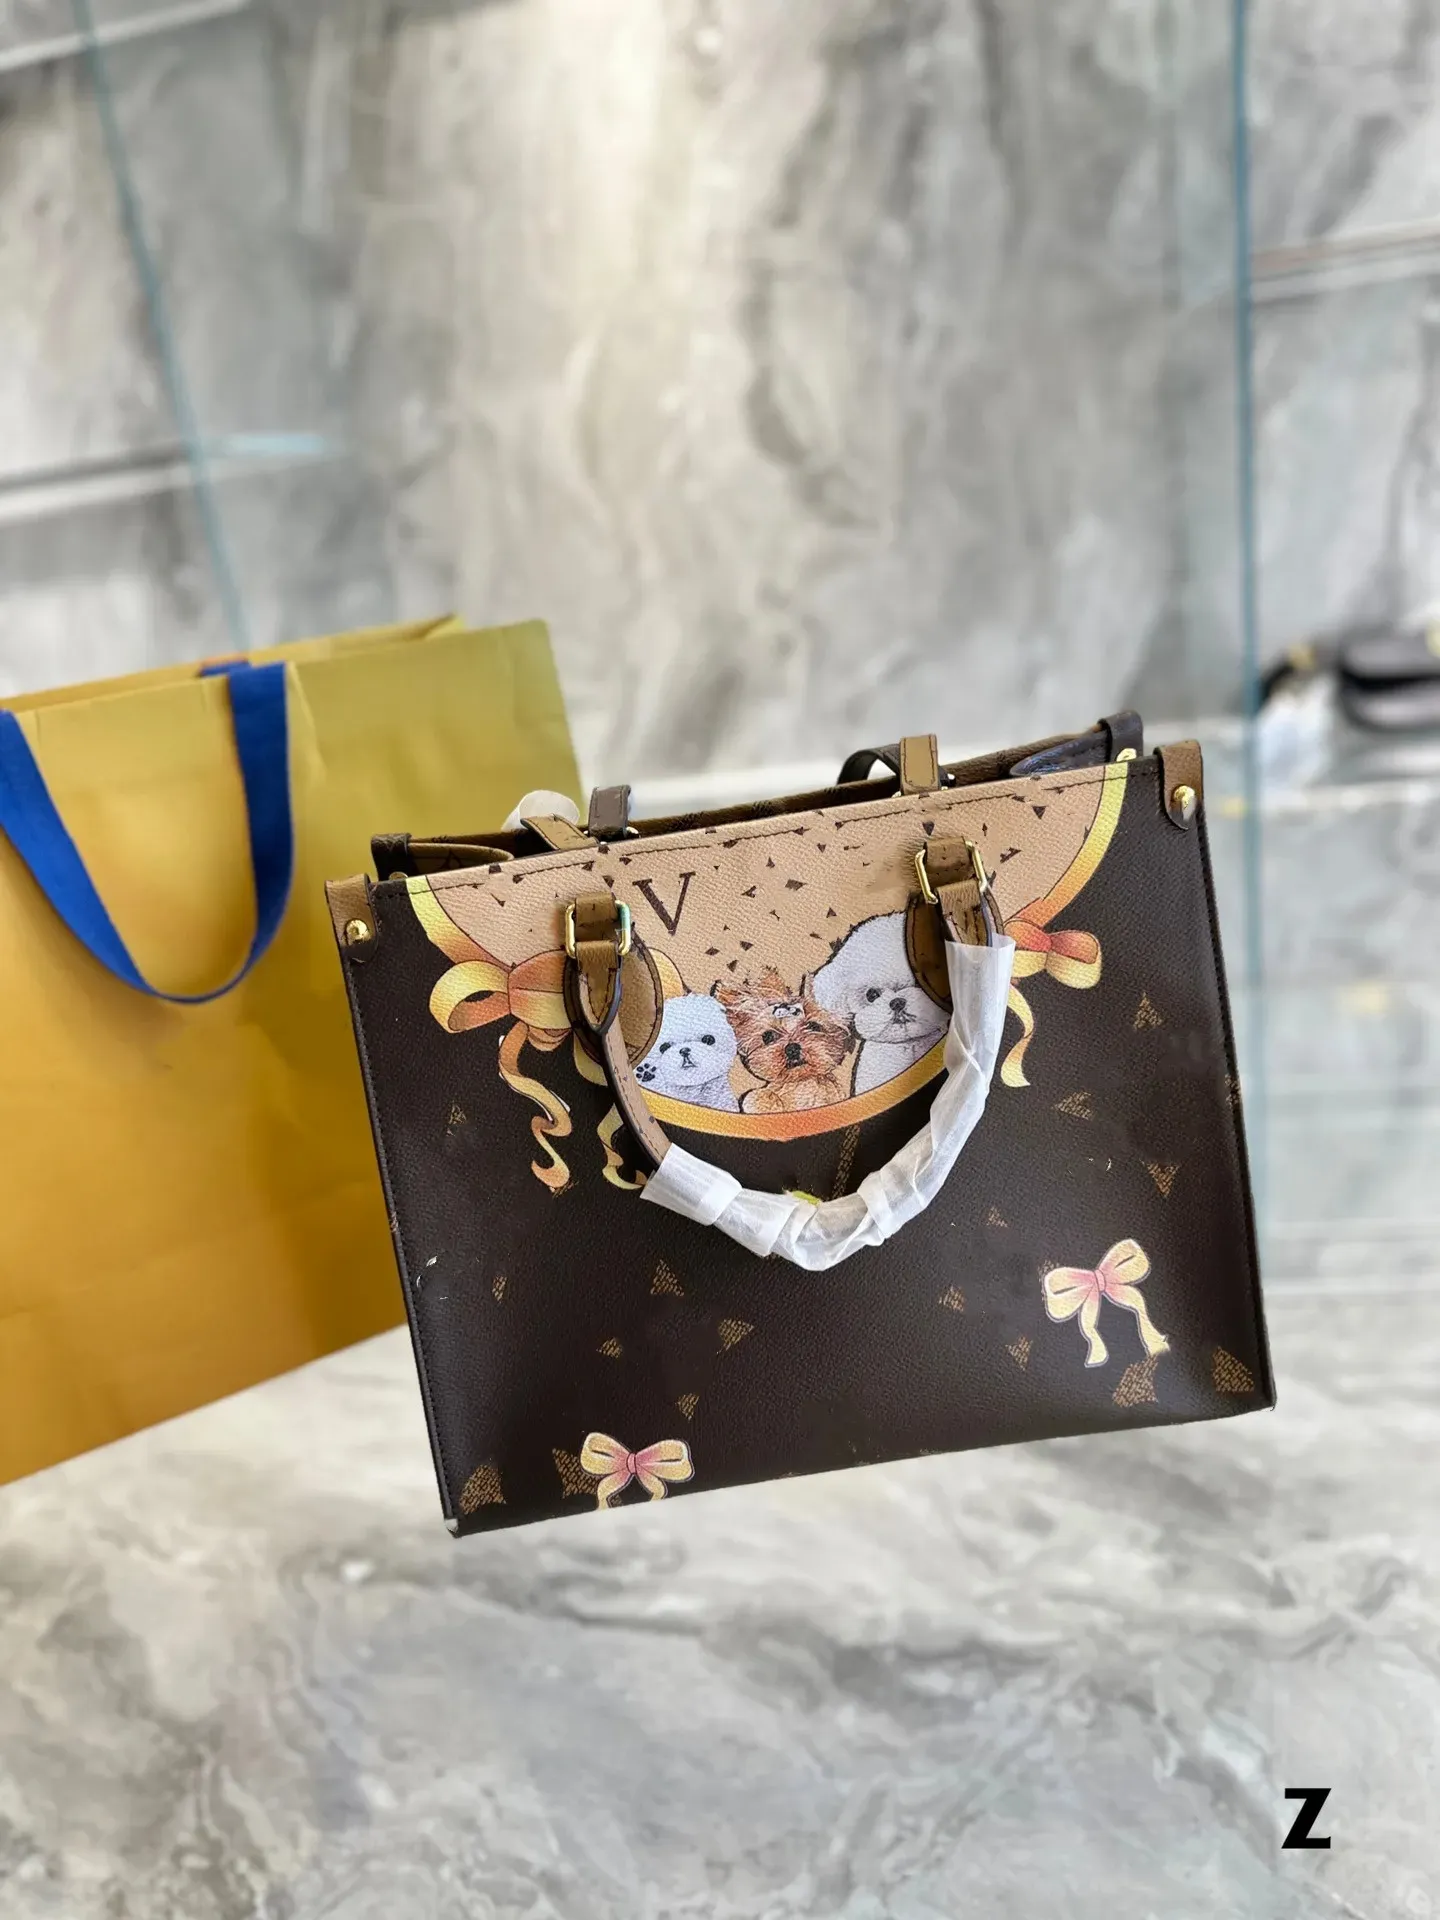 Brown Cartoon pattern Handbags Cross body High Quality Genuine Leather TOP 5A Pouch Purses shopping bags shoulder bags Clutch Backpack Tottenham late Axillary bag